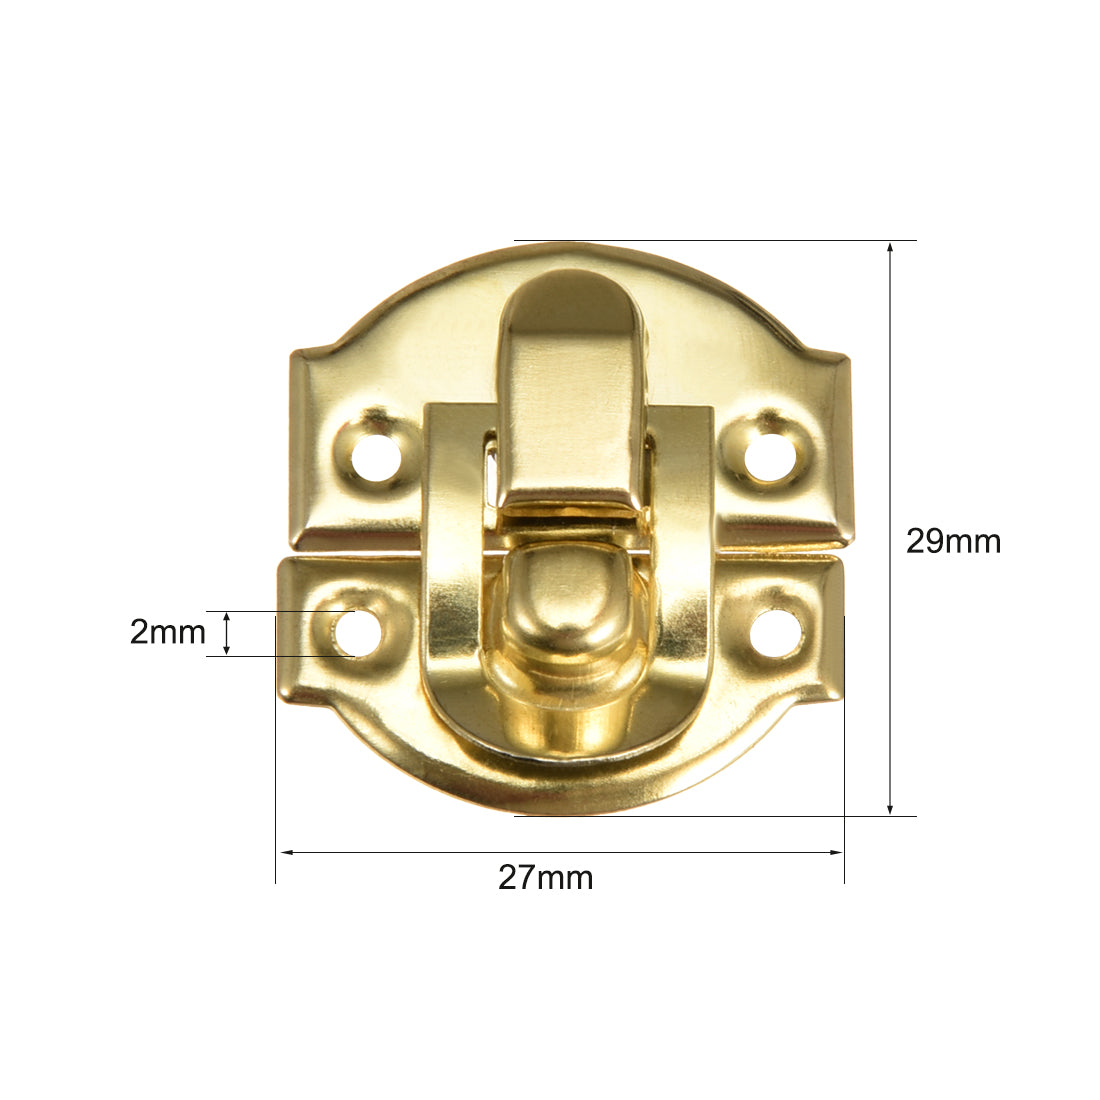 uxcell Uxcell Box Latch, Retro Style Small Size Golden Decorative Hasp Jewelry cases Catch w Screws 4 pcs